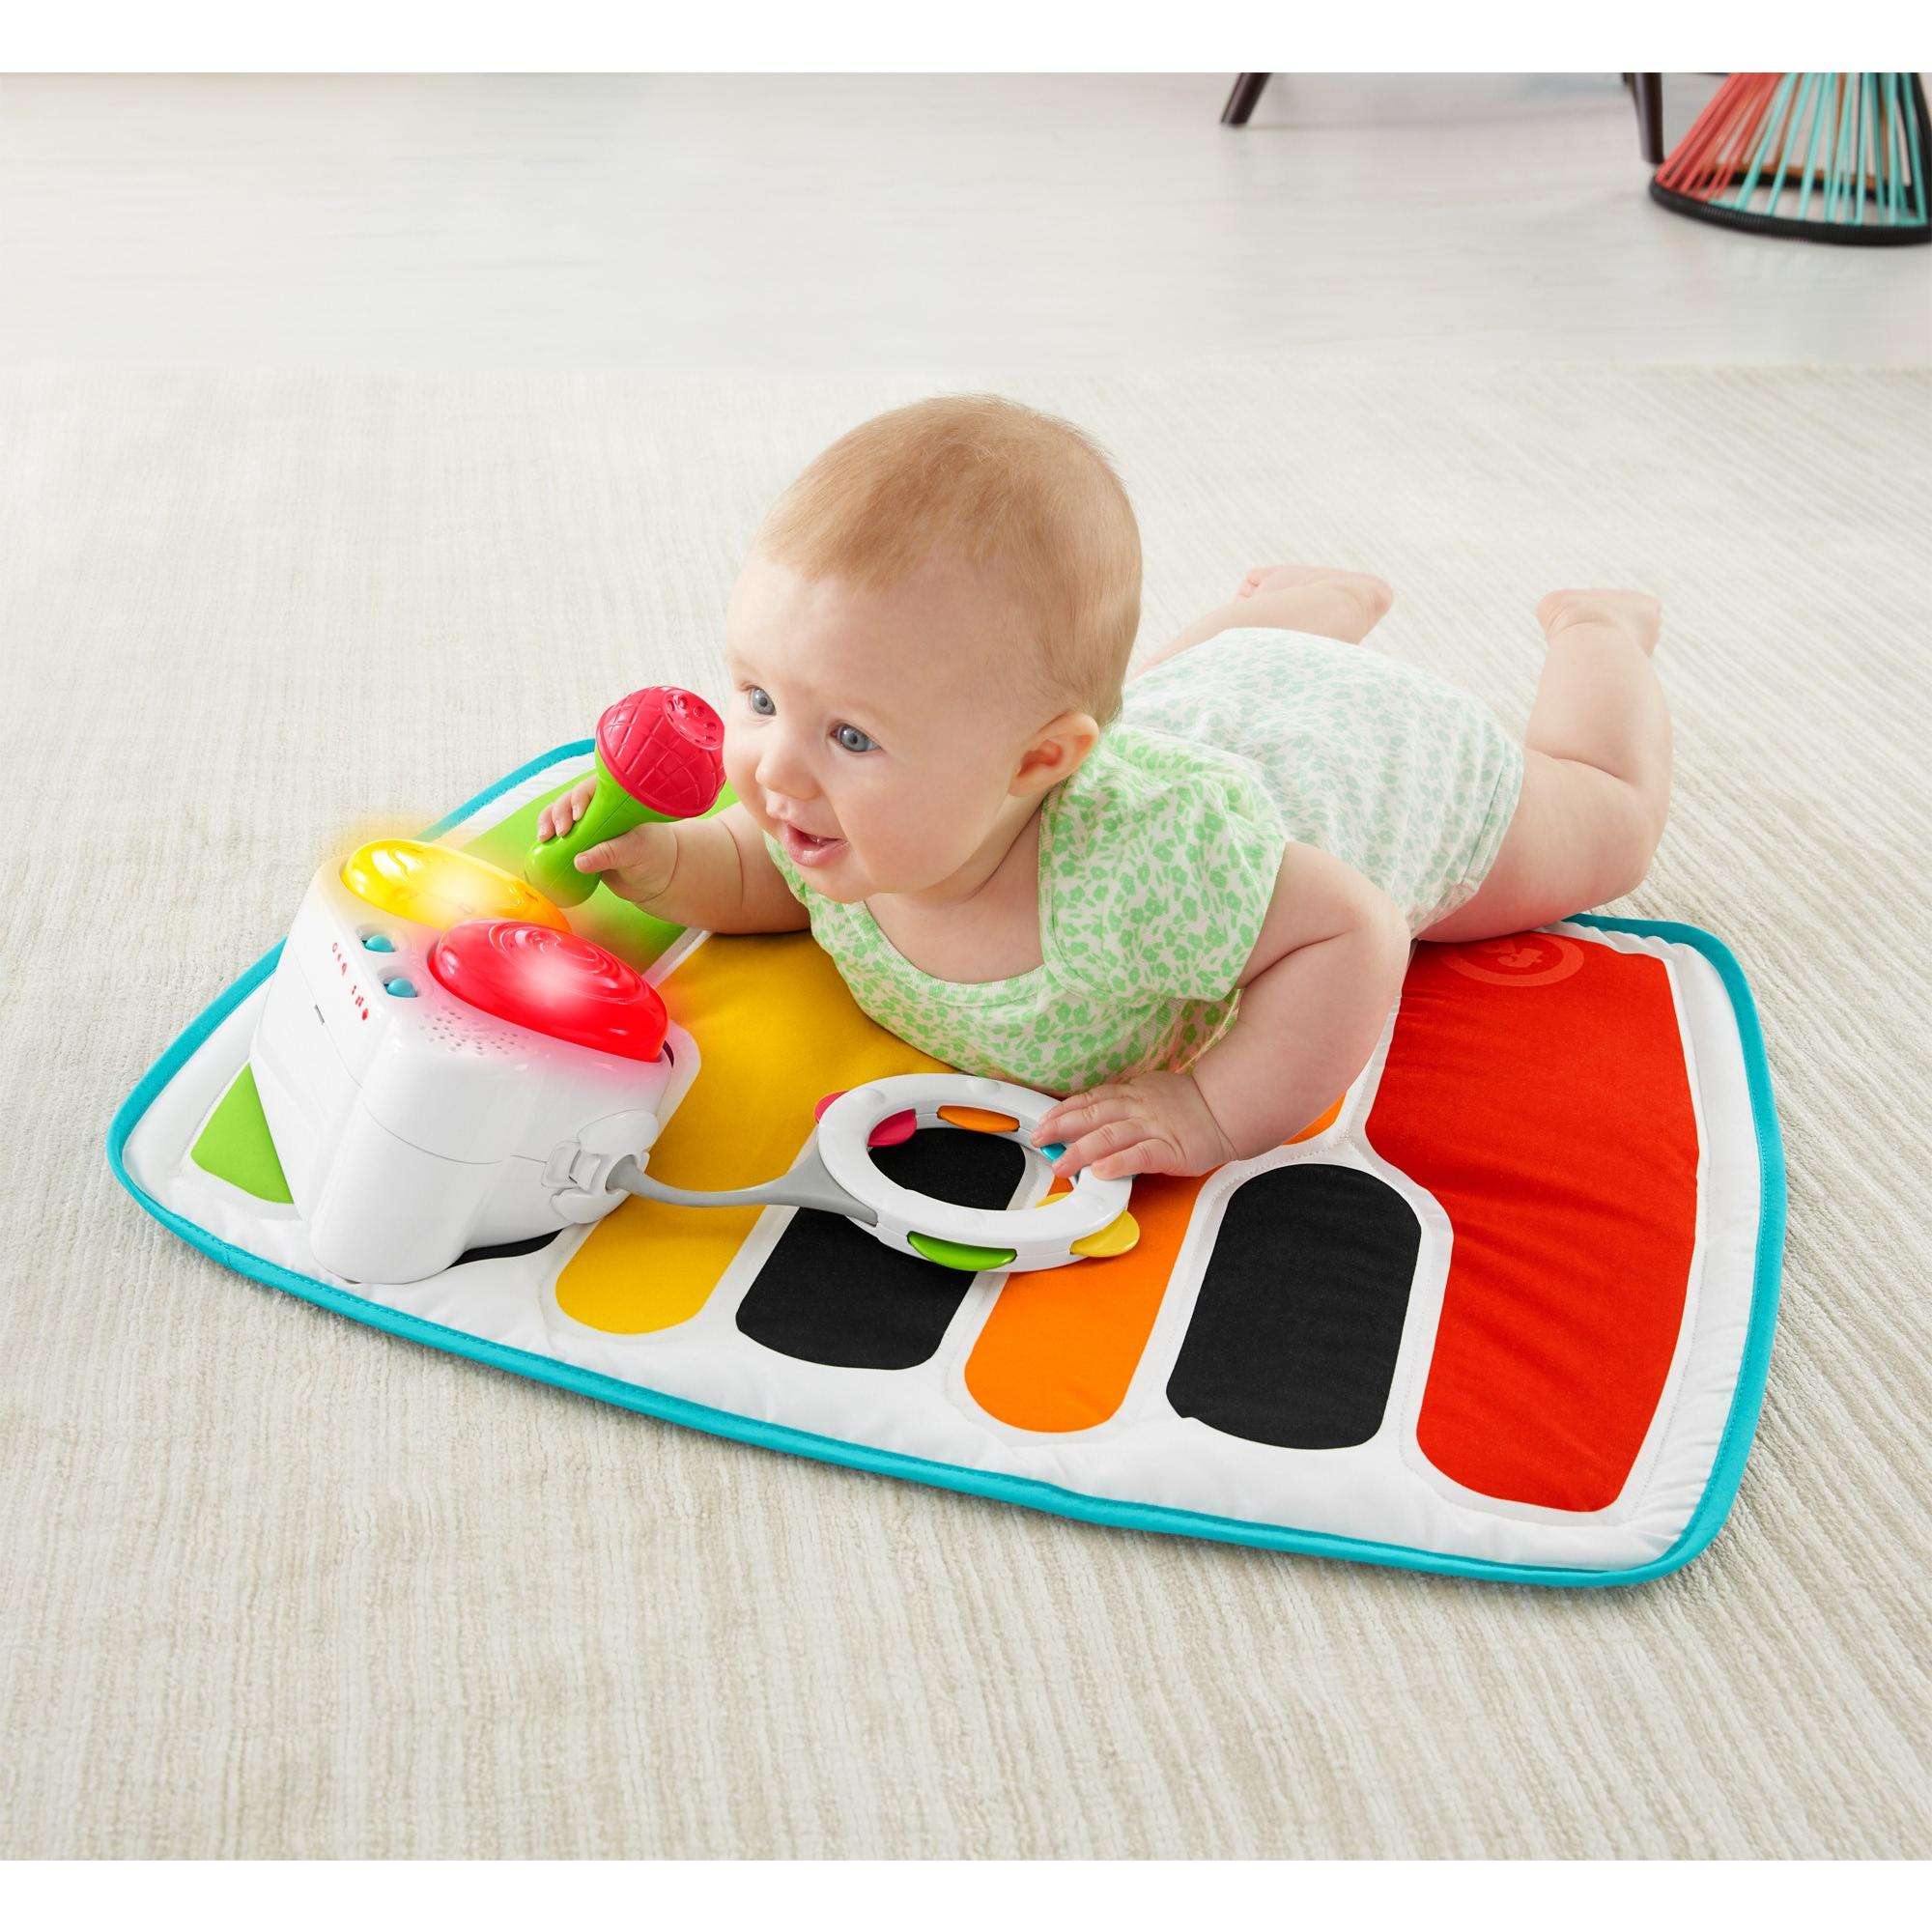 Fisher-Price 4-in-1 Step 'n Play Piano with Lights & Sounds - image 5 of 13